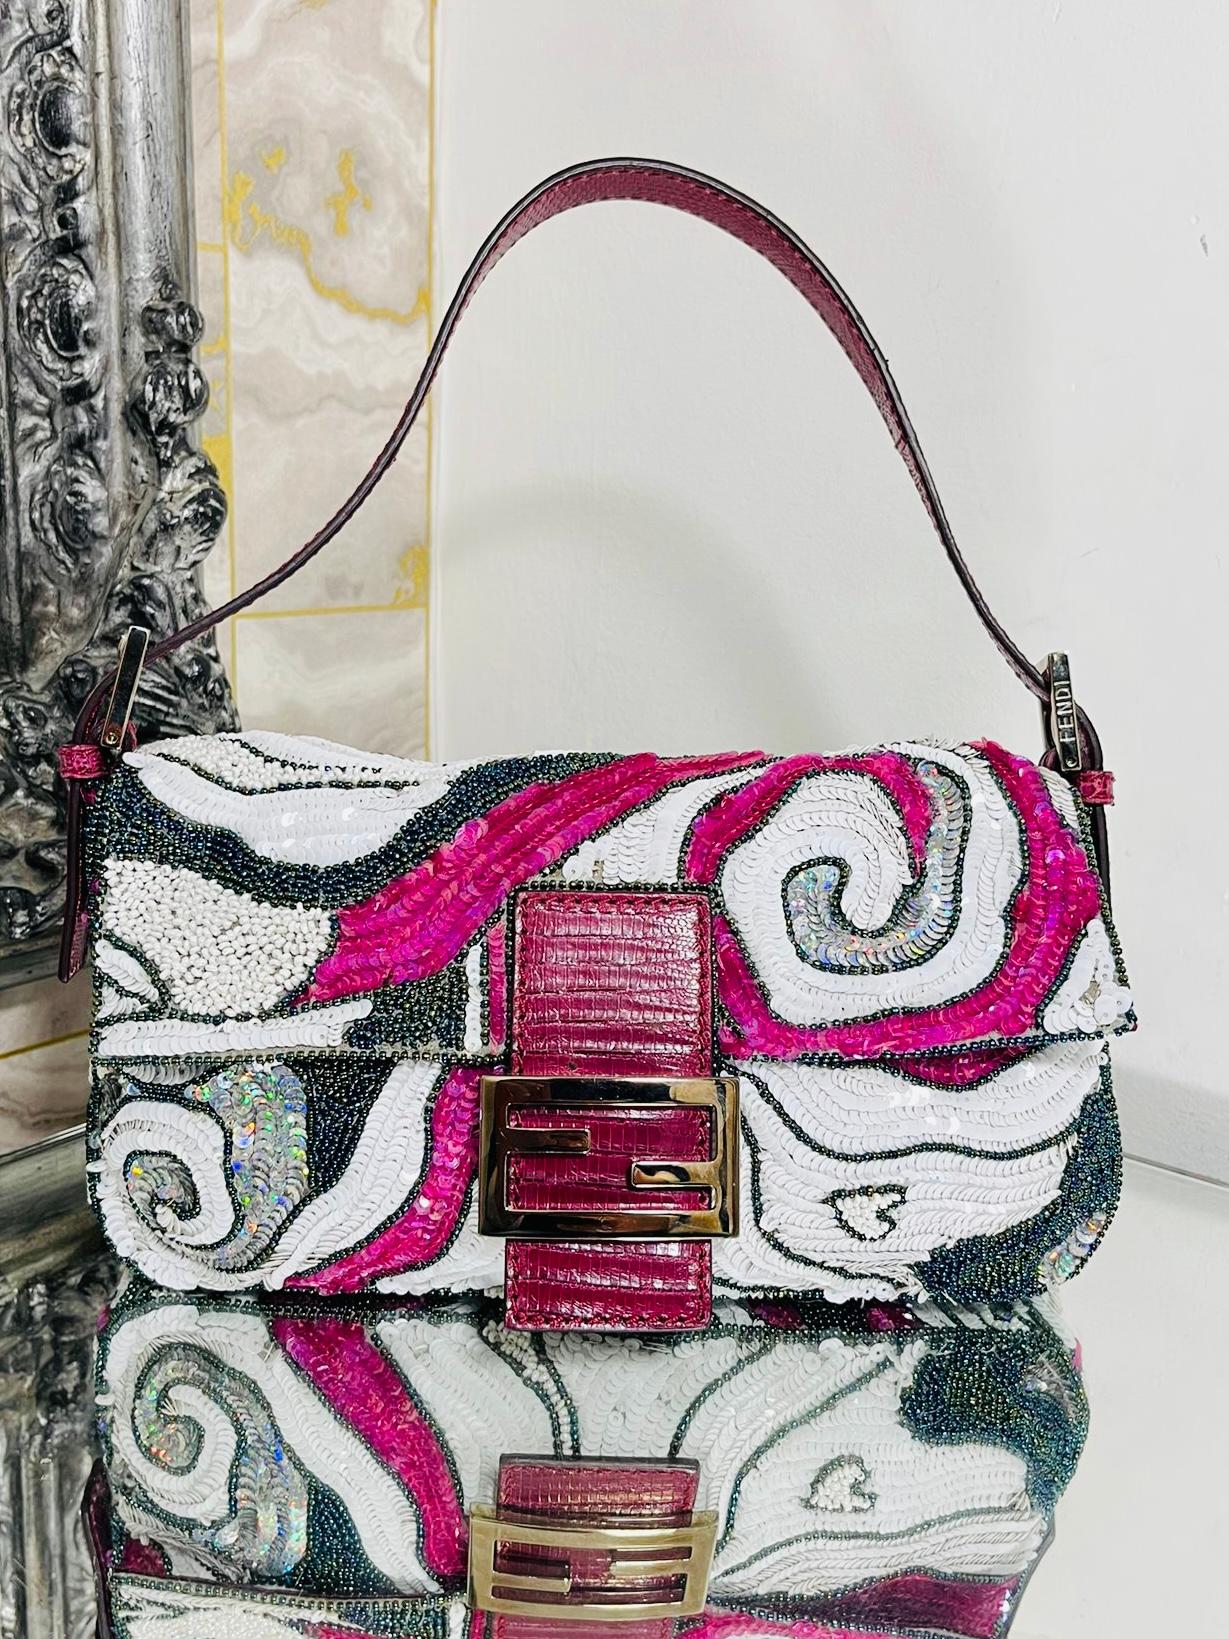 Fendi Beaded & Sequin Baguette Bag

Created by Silvia Venturi Fendi in 1997, is this rare bag which is fully 

adorned with pink, black and white beads and sequins. Magnetic closure

flap with pink snake skink accents and strap. Silver